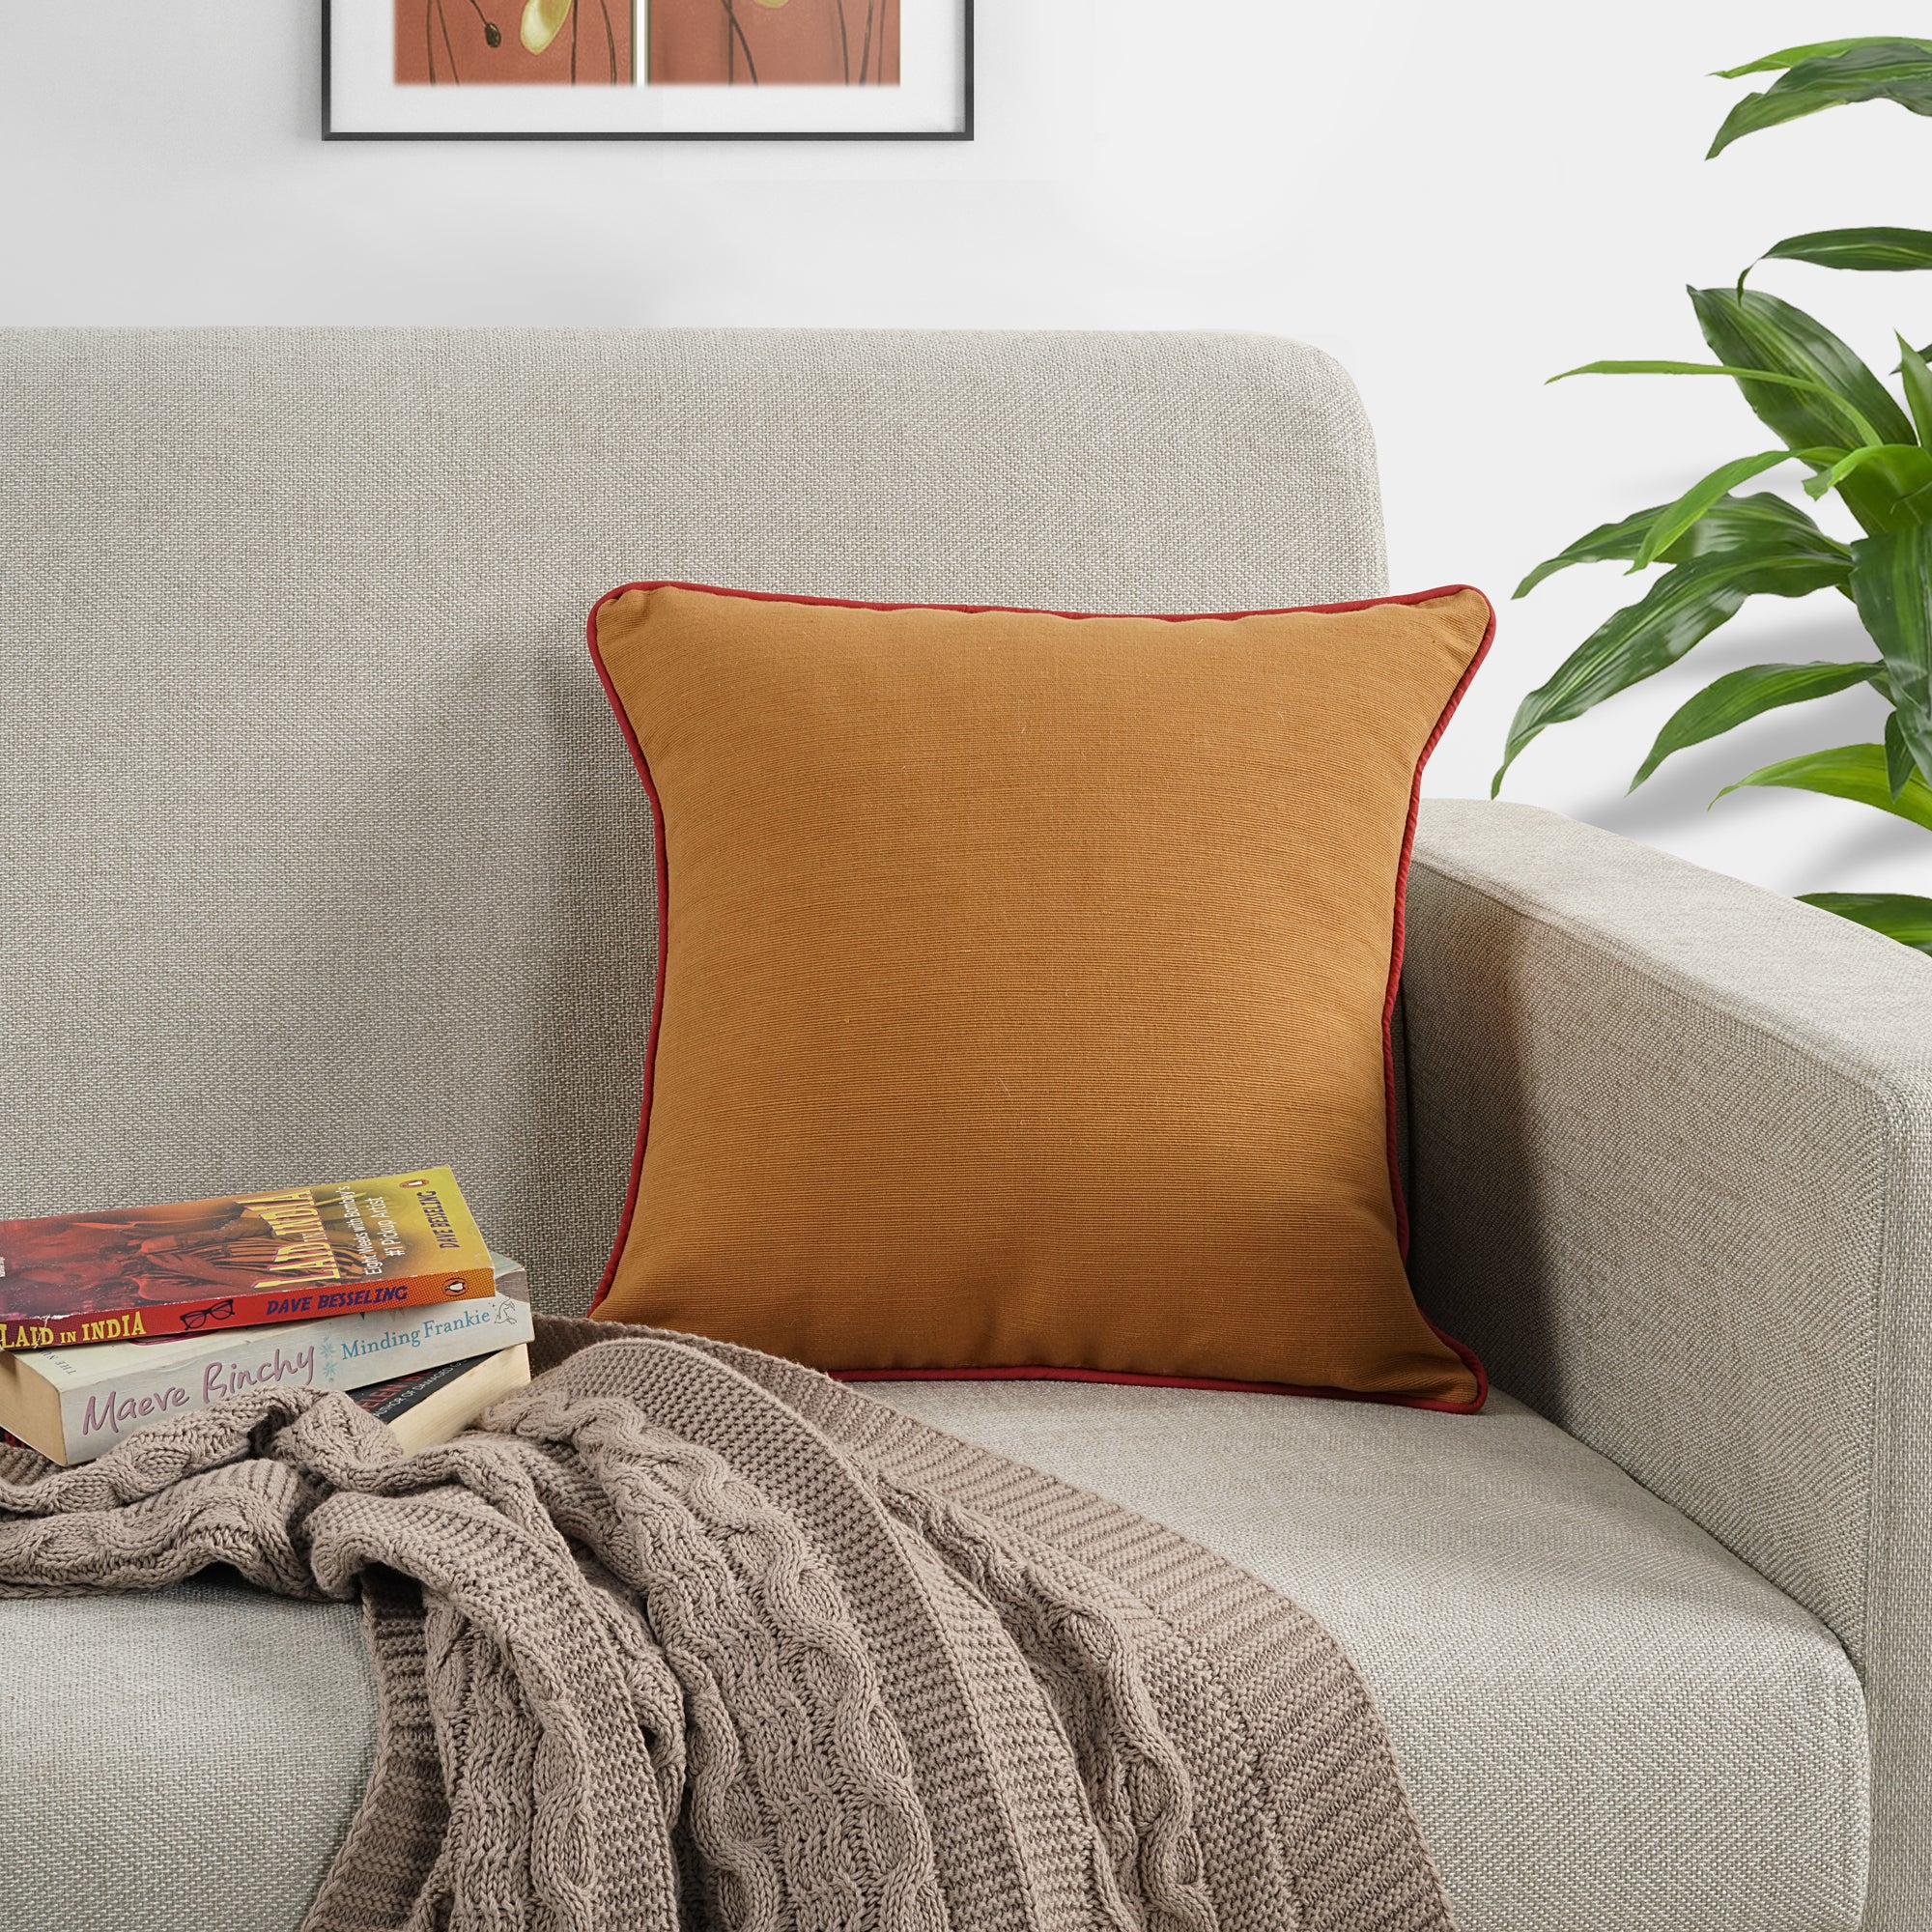 Soft Woven Corded Stripe Cotton Cushion Cover Set in Mustard online (1Pc)